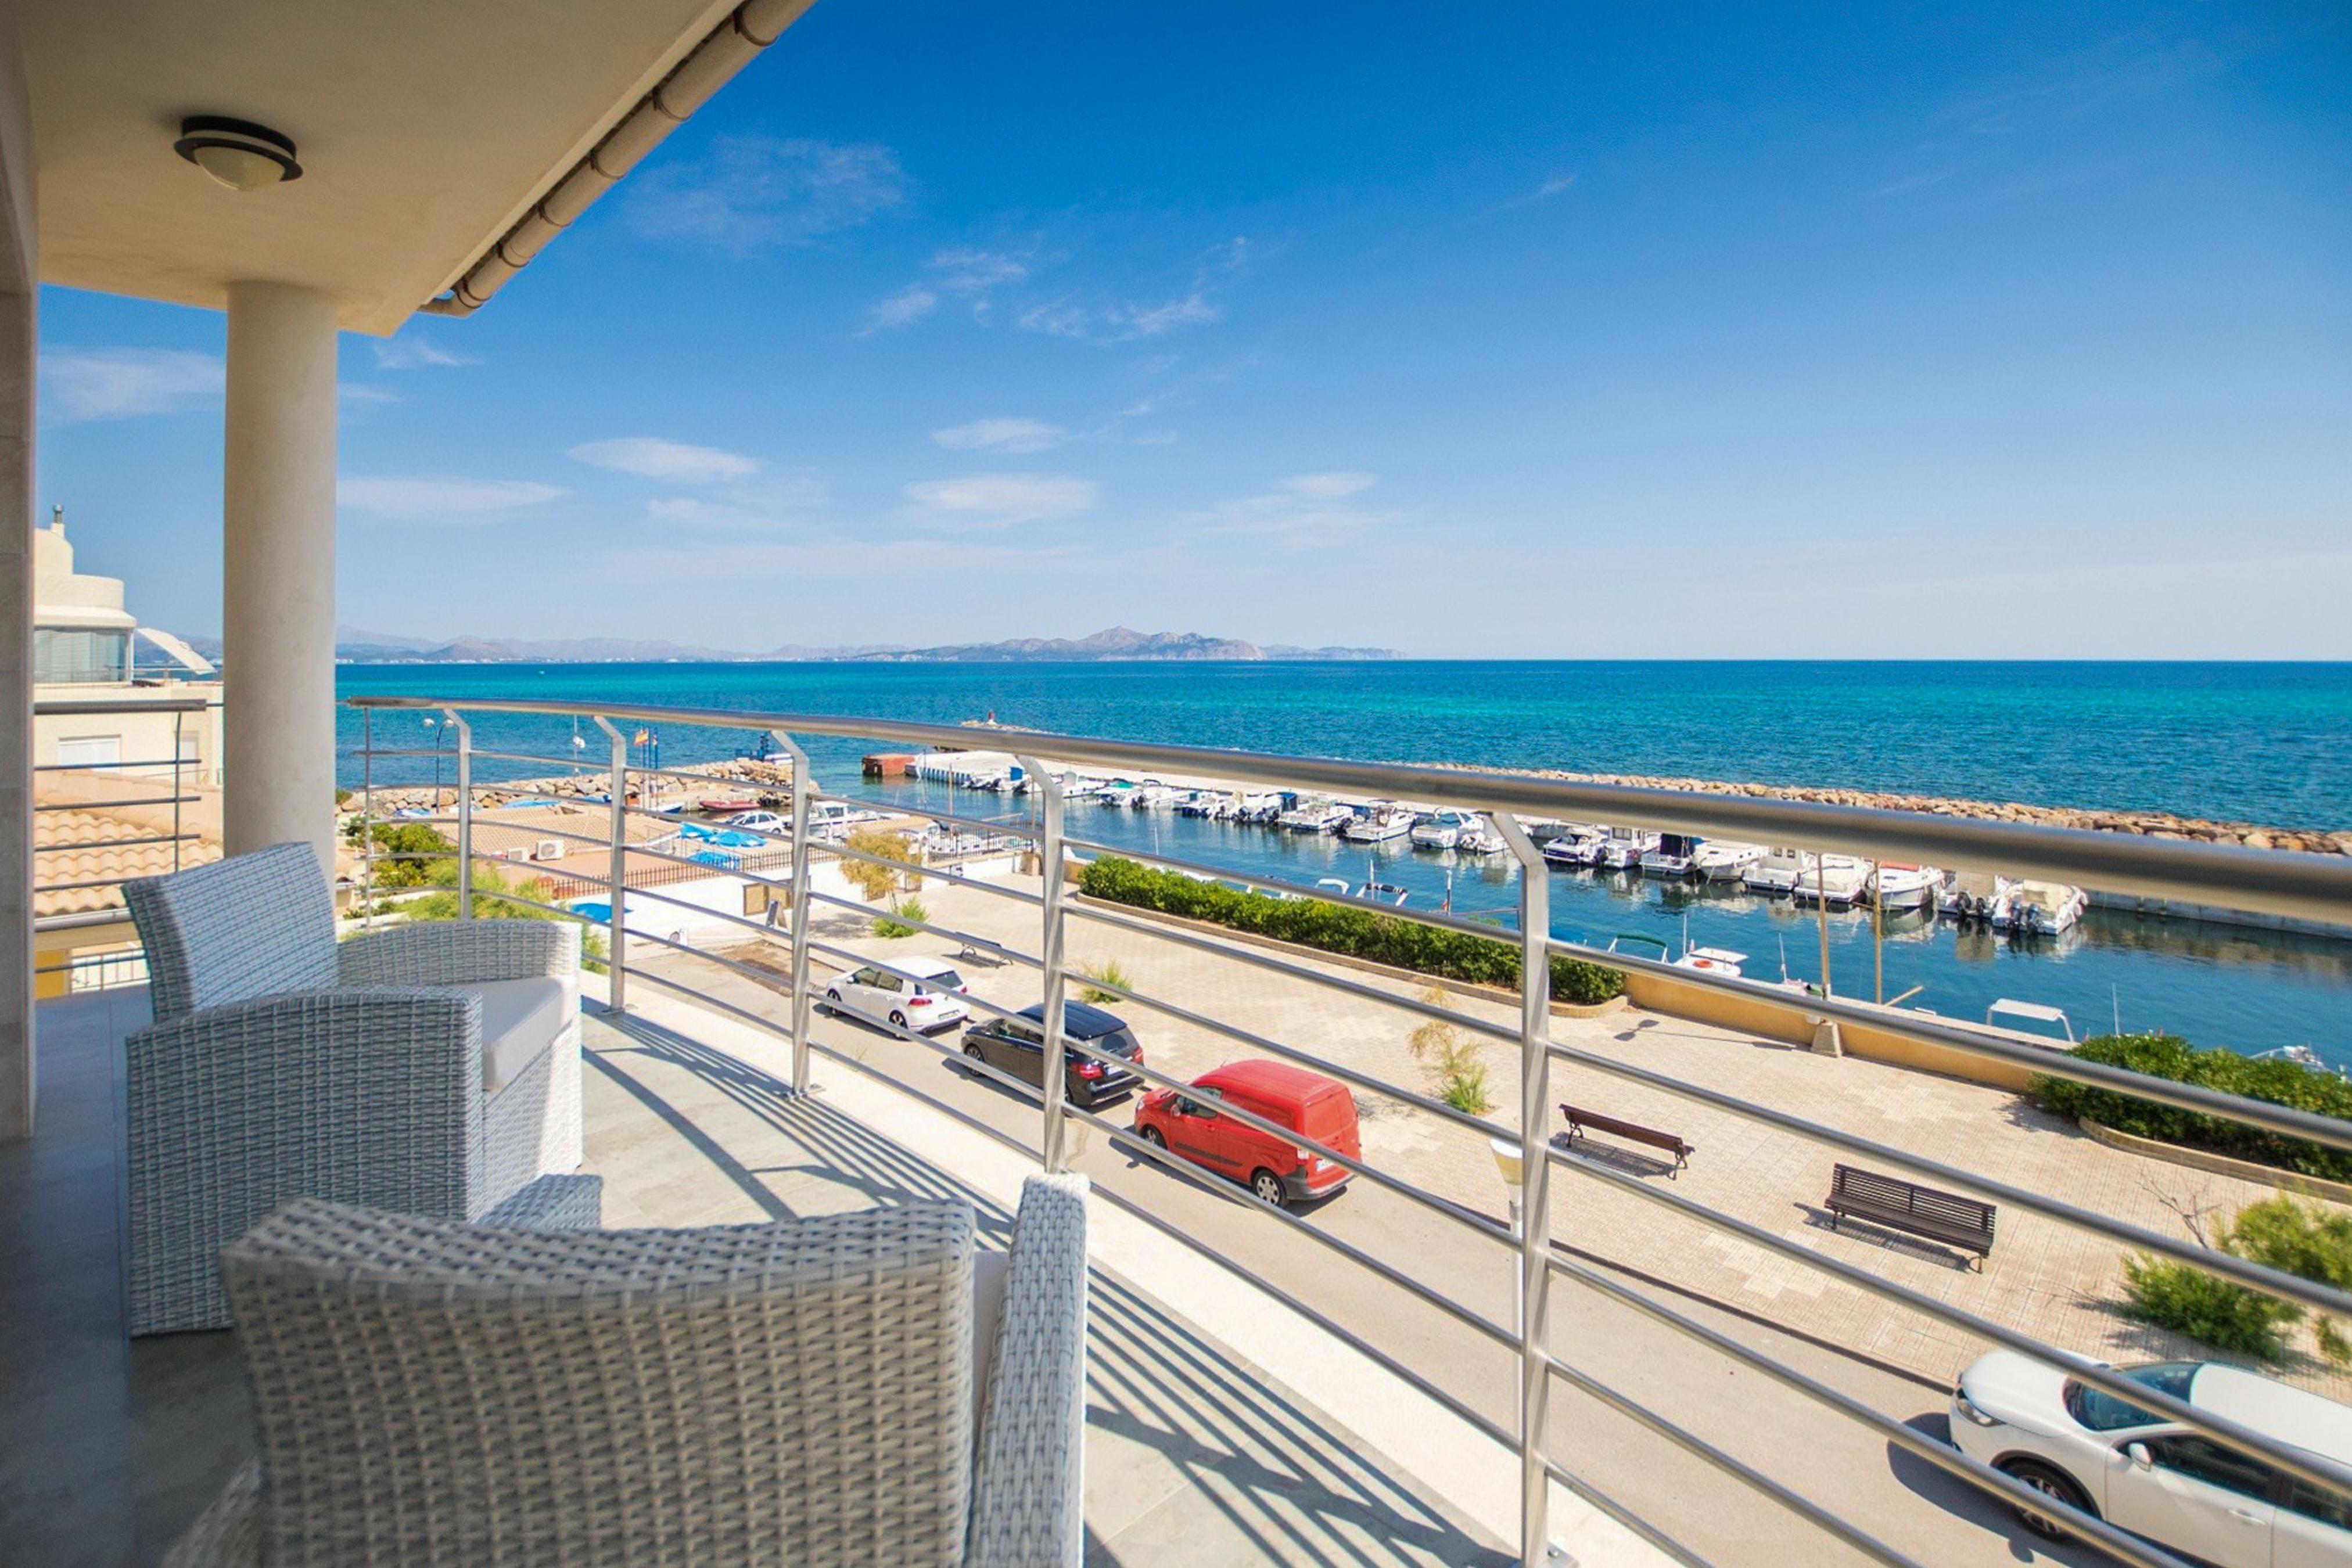 Property Image 1 - BOHEMI - Fabulous seafront house with an indoor pool. Free WIFI.